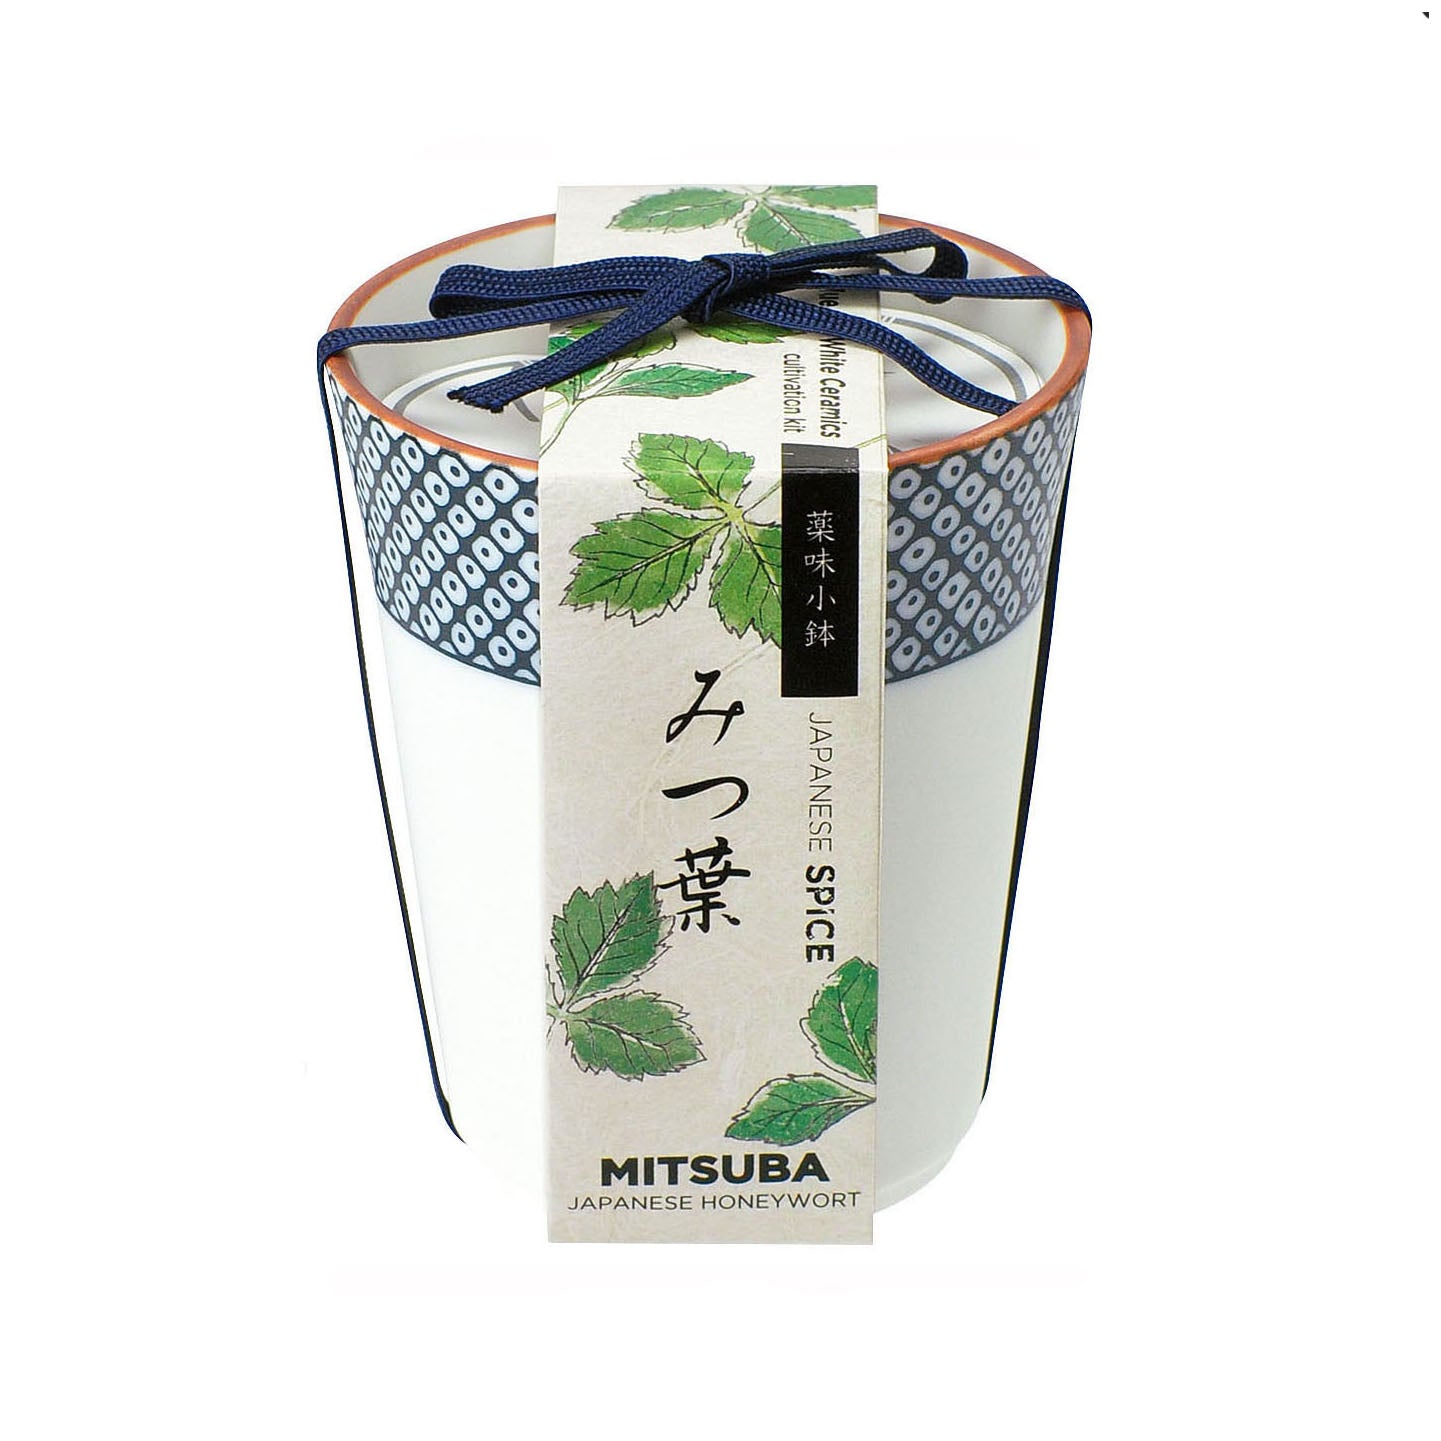 Grow Your Own Japanese Herbs Kit in a Ceramic Pot - Mitsuba(Japanese Parsley)